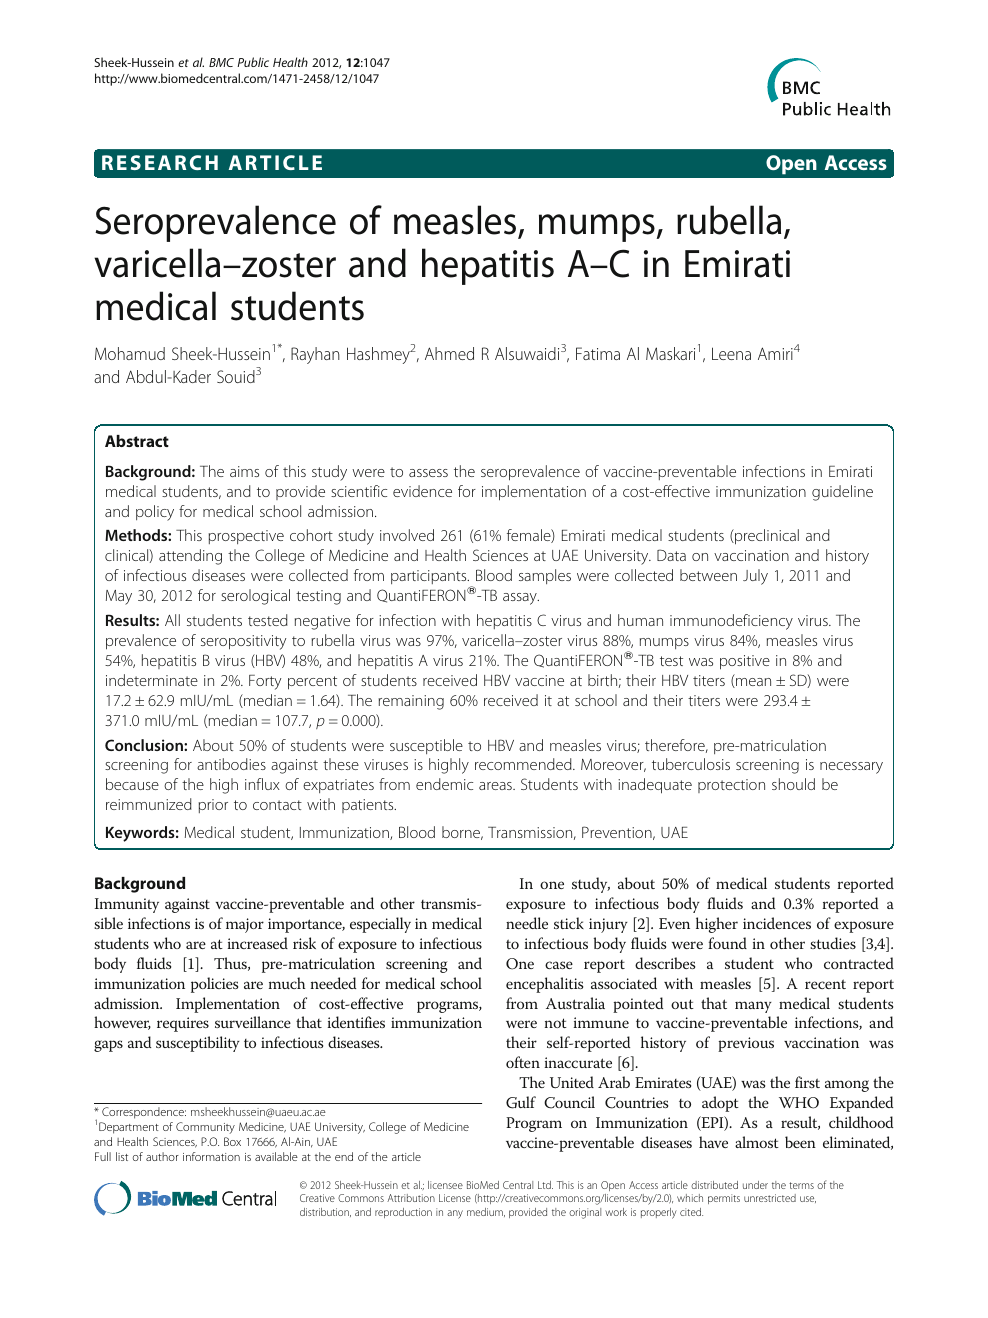 Seroprevalence Of Measles Mumps Rubella Varicella Zoster And Hepatitis A C In Emirati Medical Students Topic Of Research Paper In Veterinary Science Download Scholarly Article Pdf And Read For Free On Cyberleninka Open